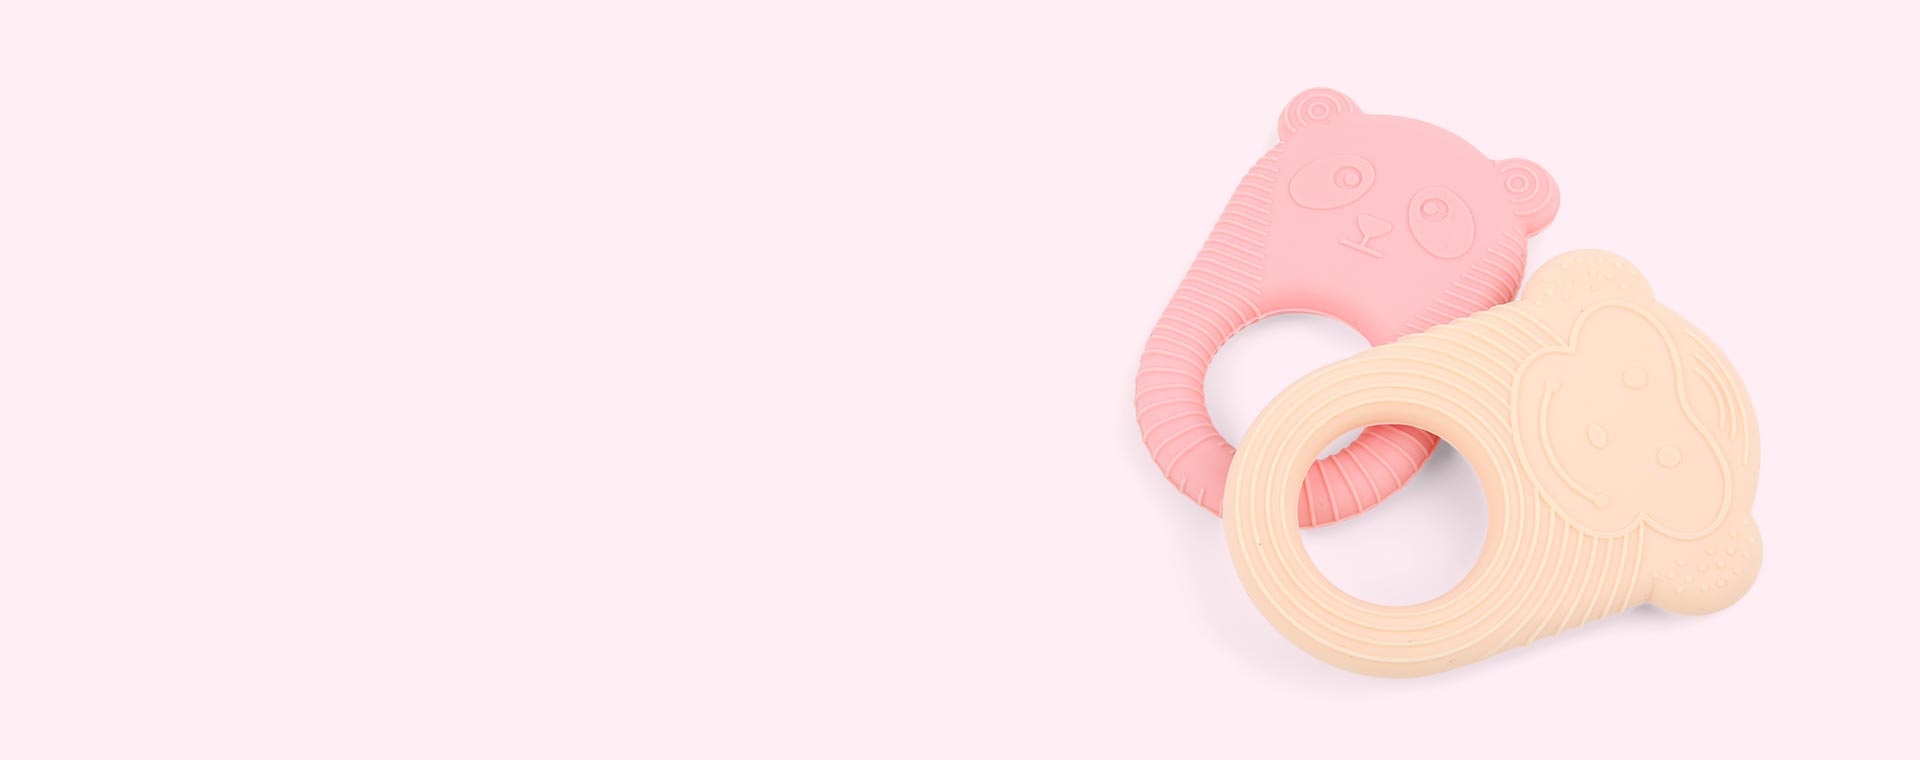 Nelson & Ling Ling Vanilla / Coral OYOY 2-Pack Animal Baby Teether